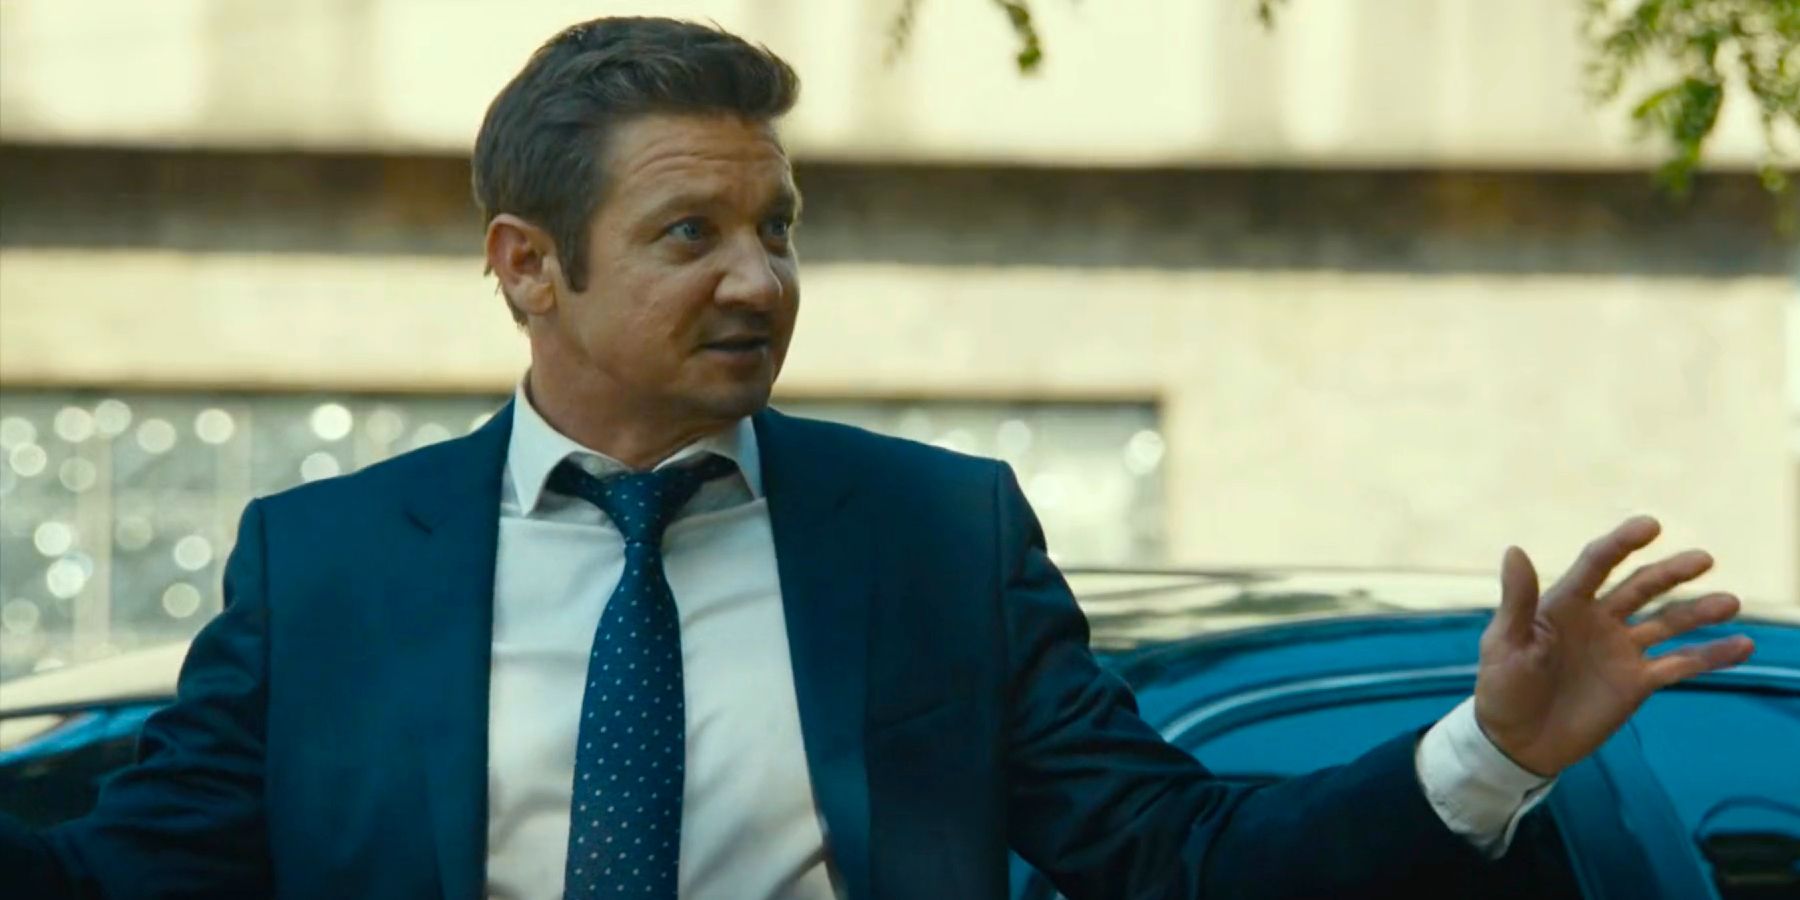 Jeremy Renner holding up his hands in Mayor of Kingstown Season 2 Episode 7